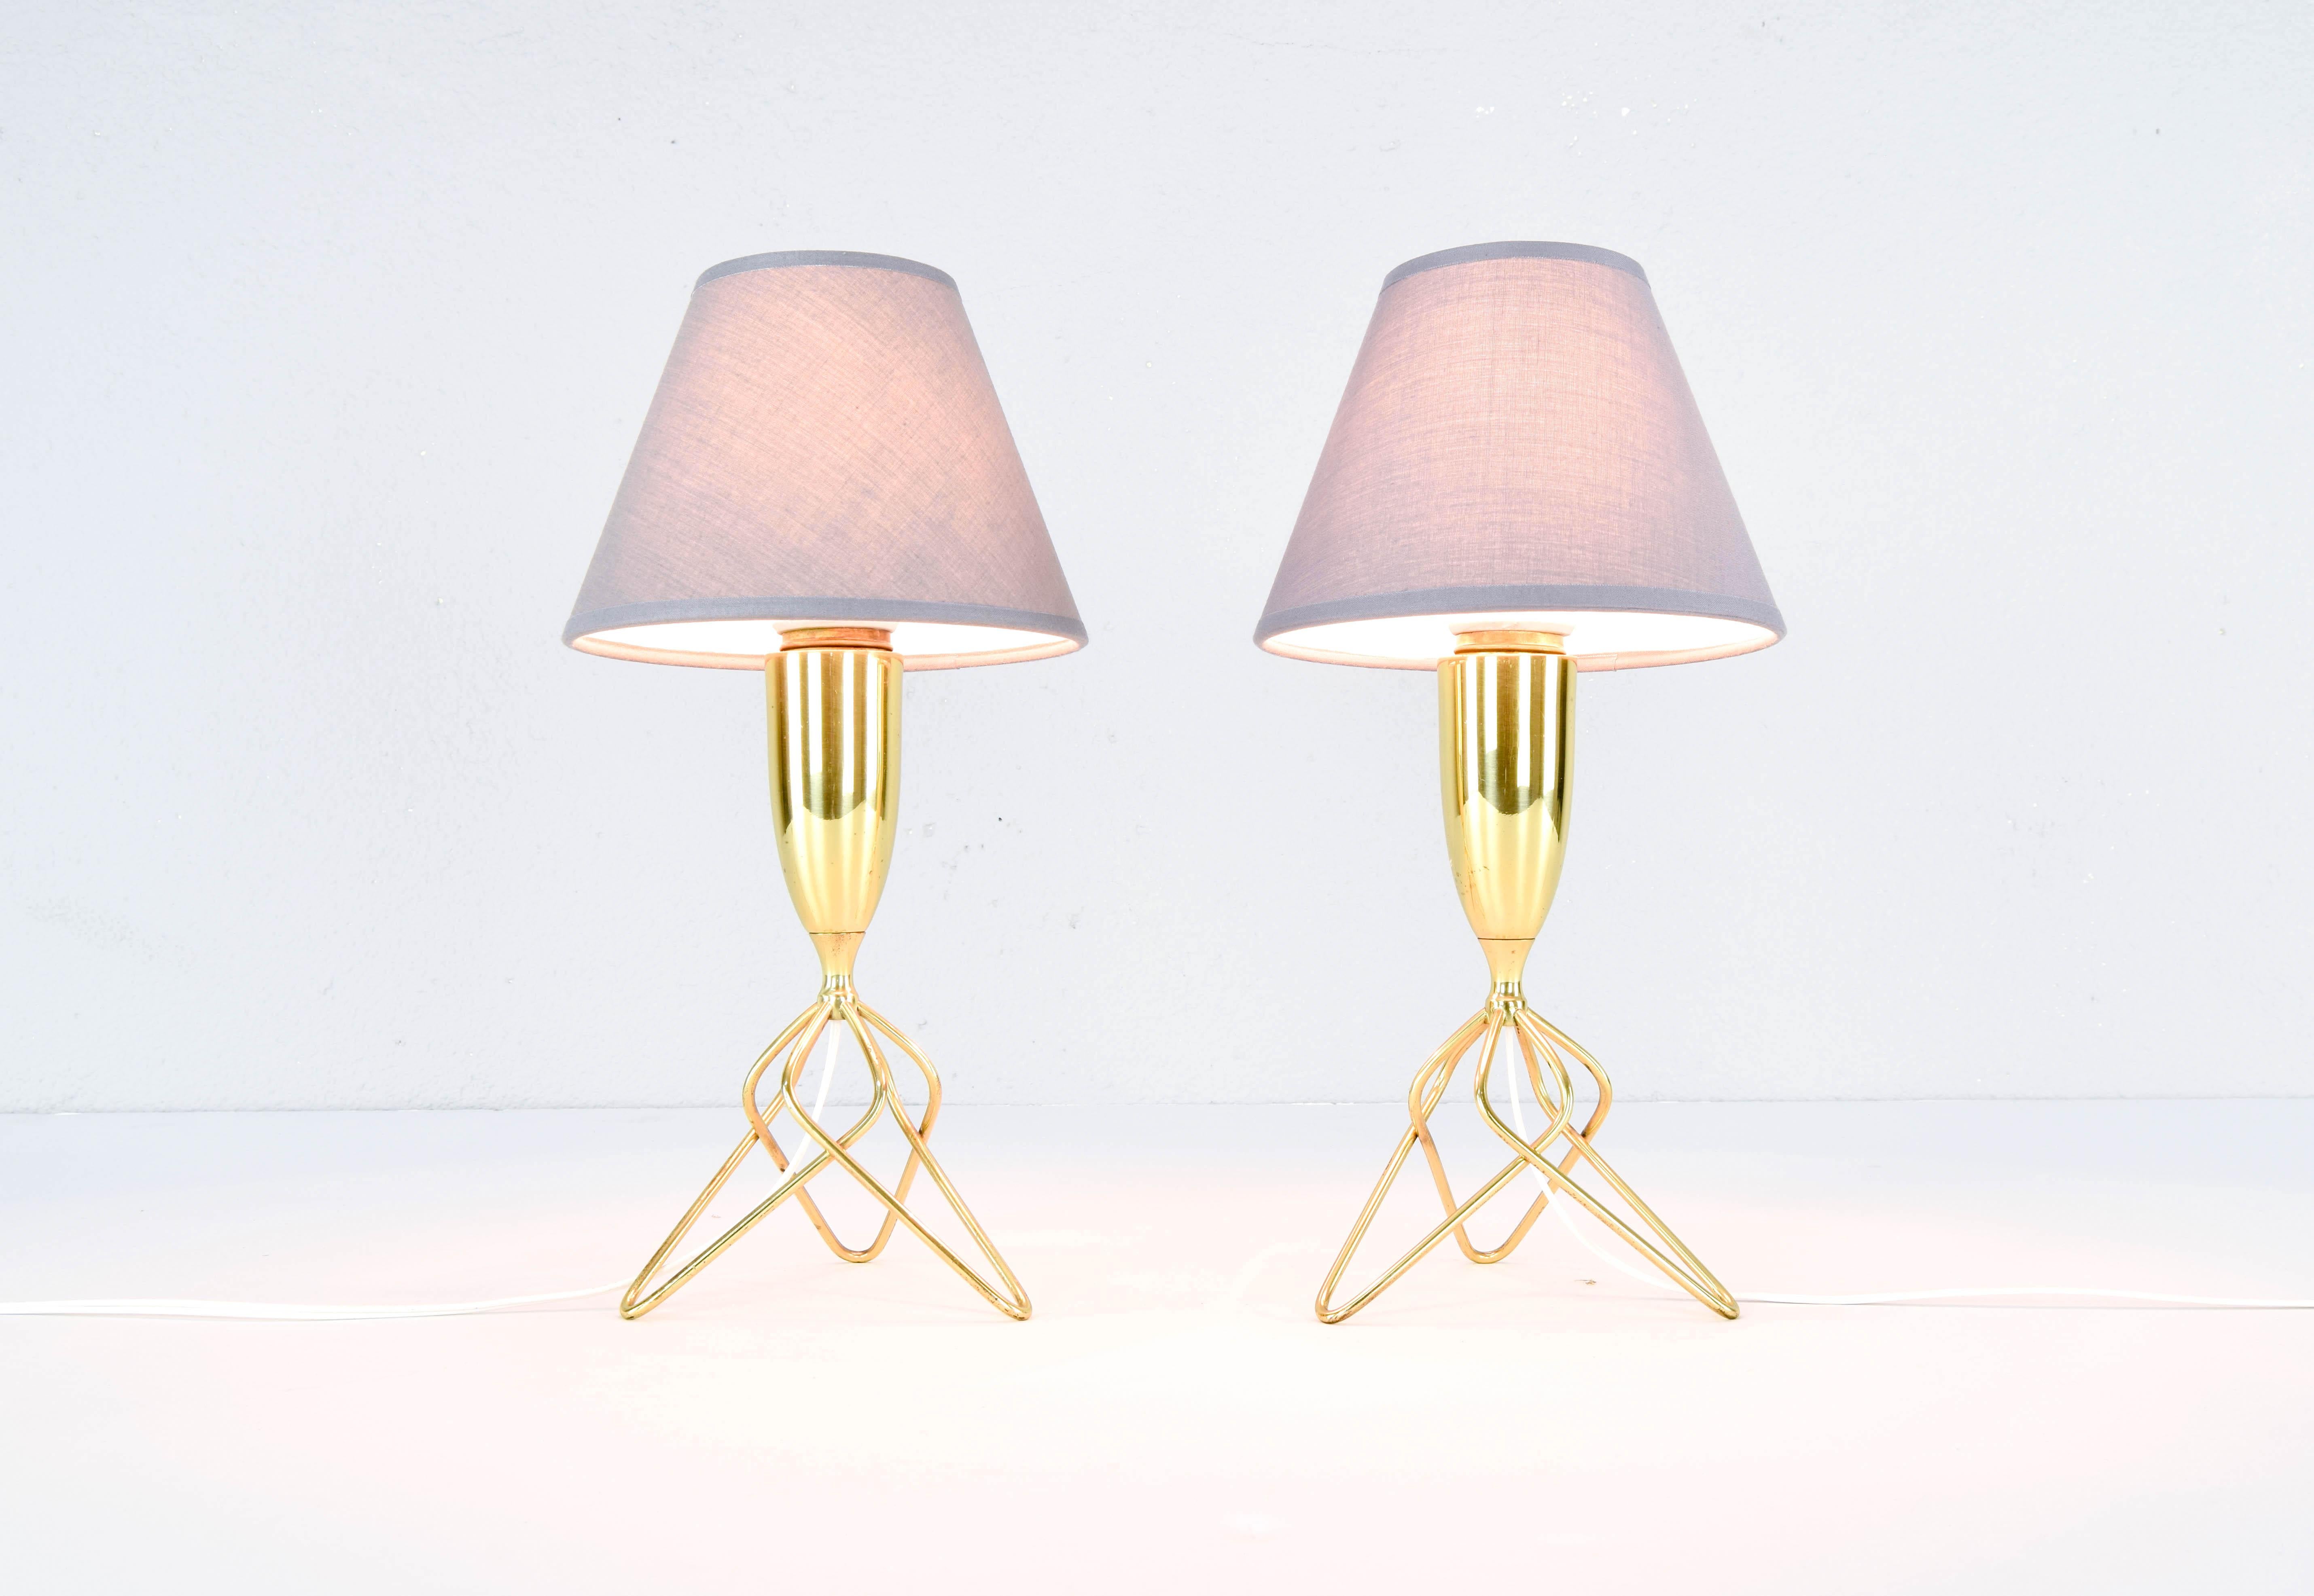 Pair of Danish Mid-Century Modern tripod table lamps with brass rods from the 1960s.
Beautiful Nordic design with three interlocking golden rods legs and a brass body that are kept in very good condition.
Although they retain the original brass